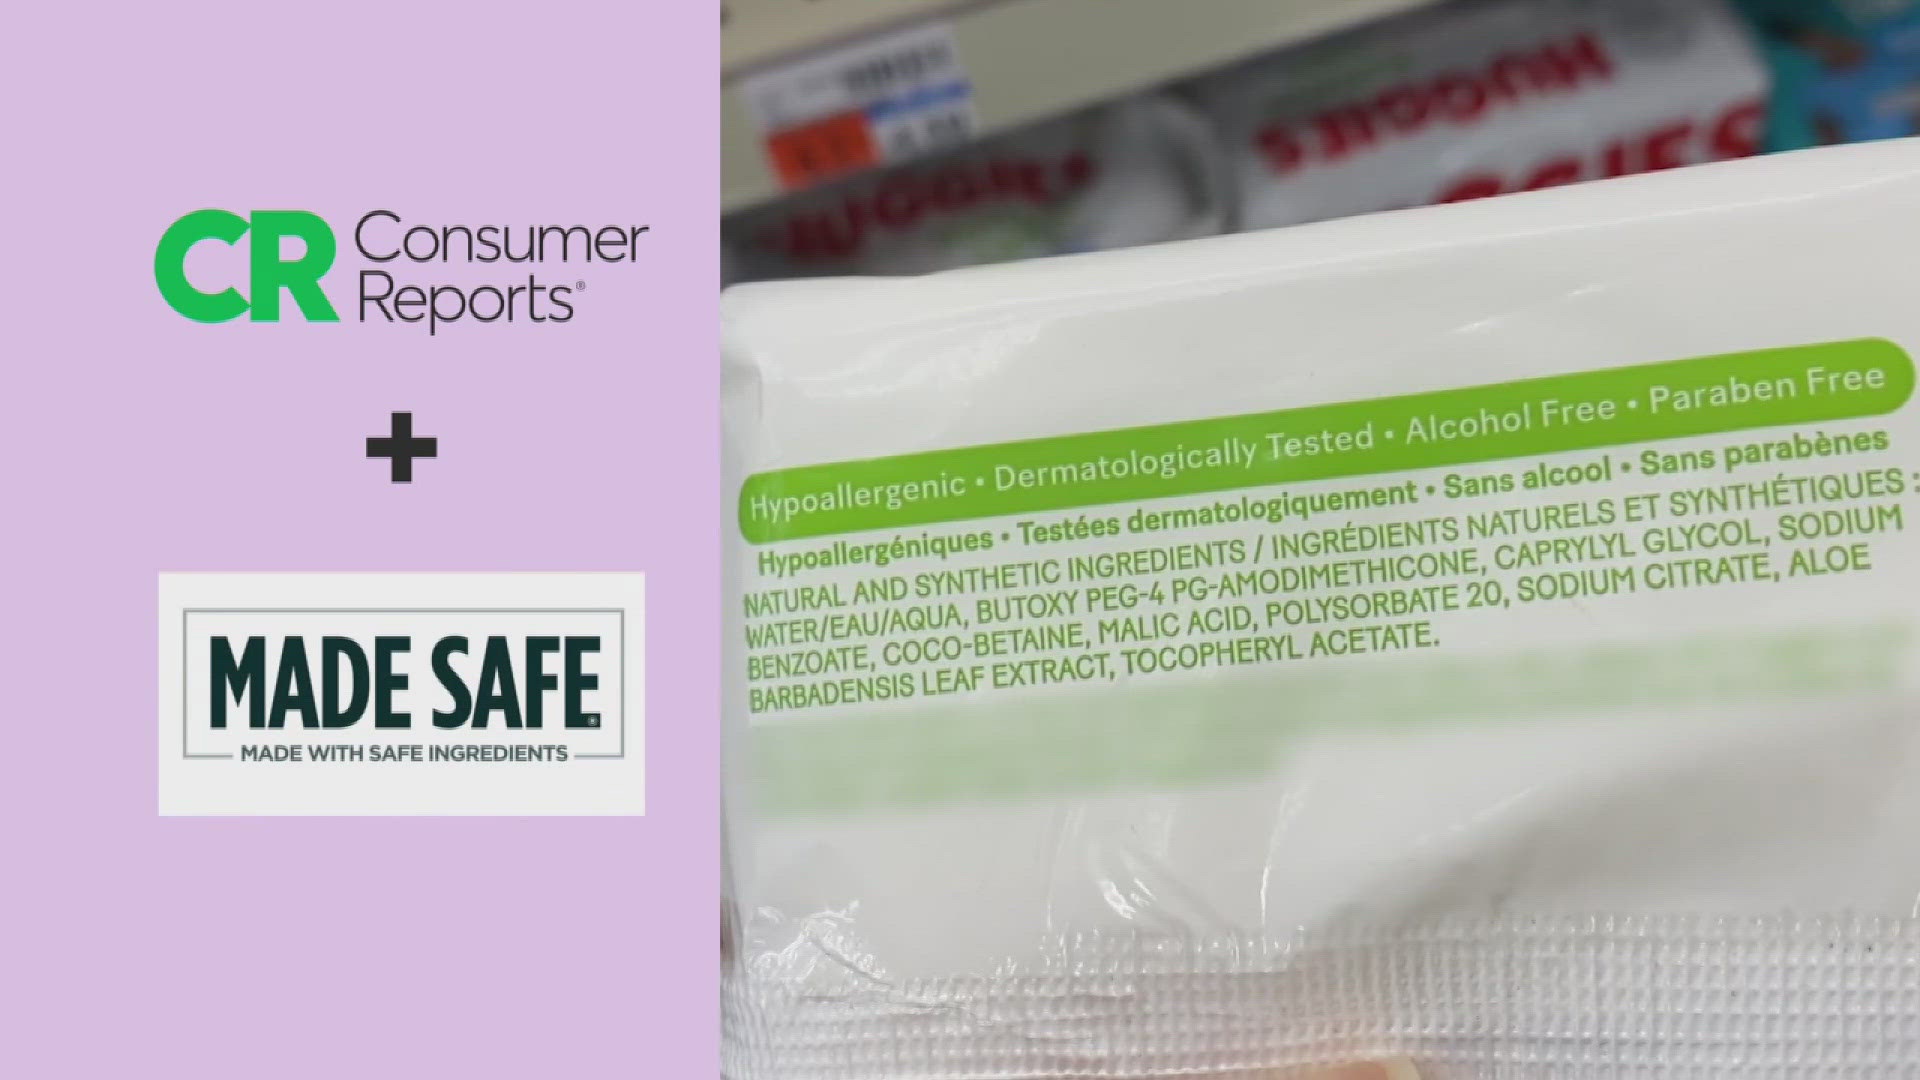 Our partners at Consumer Reports took a close look at the ingredients in popular baby wipe brands that may pose a risk to your baby and the planet.